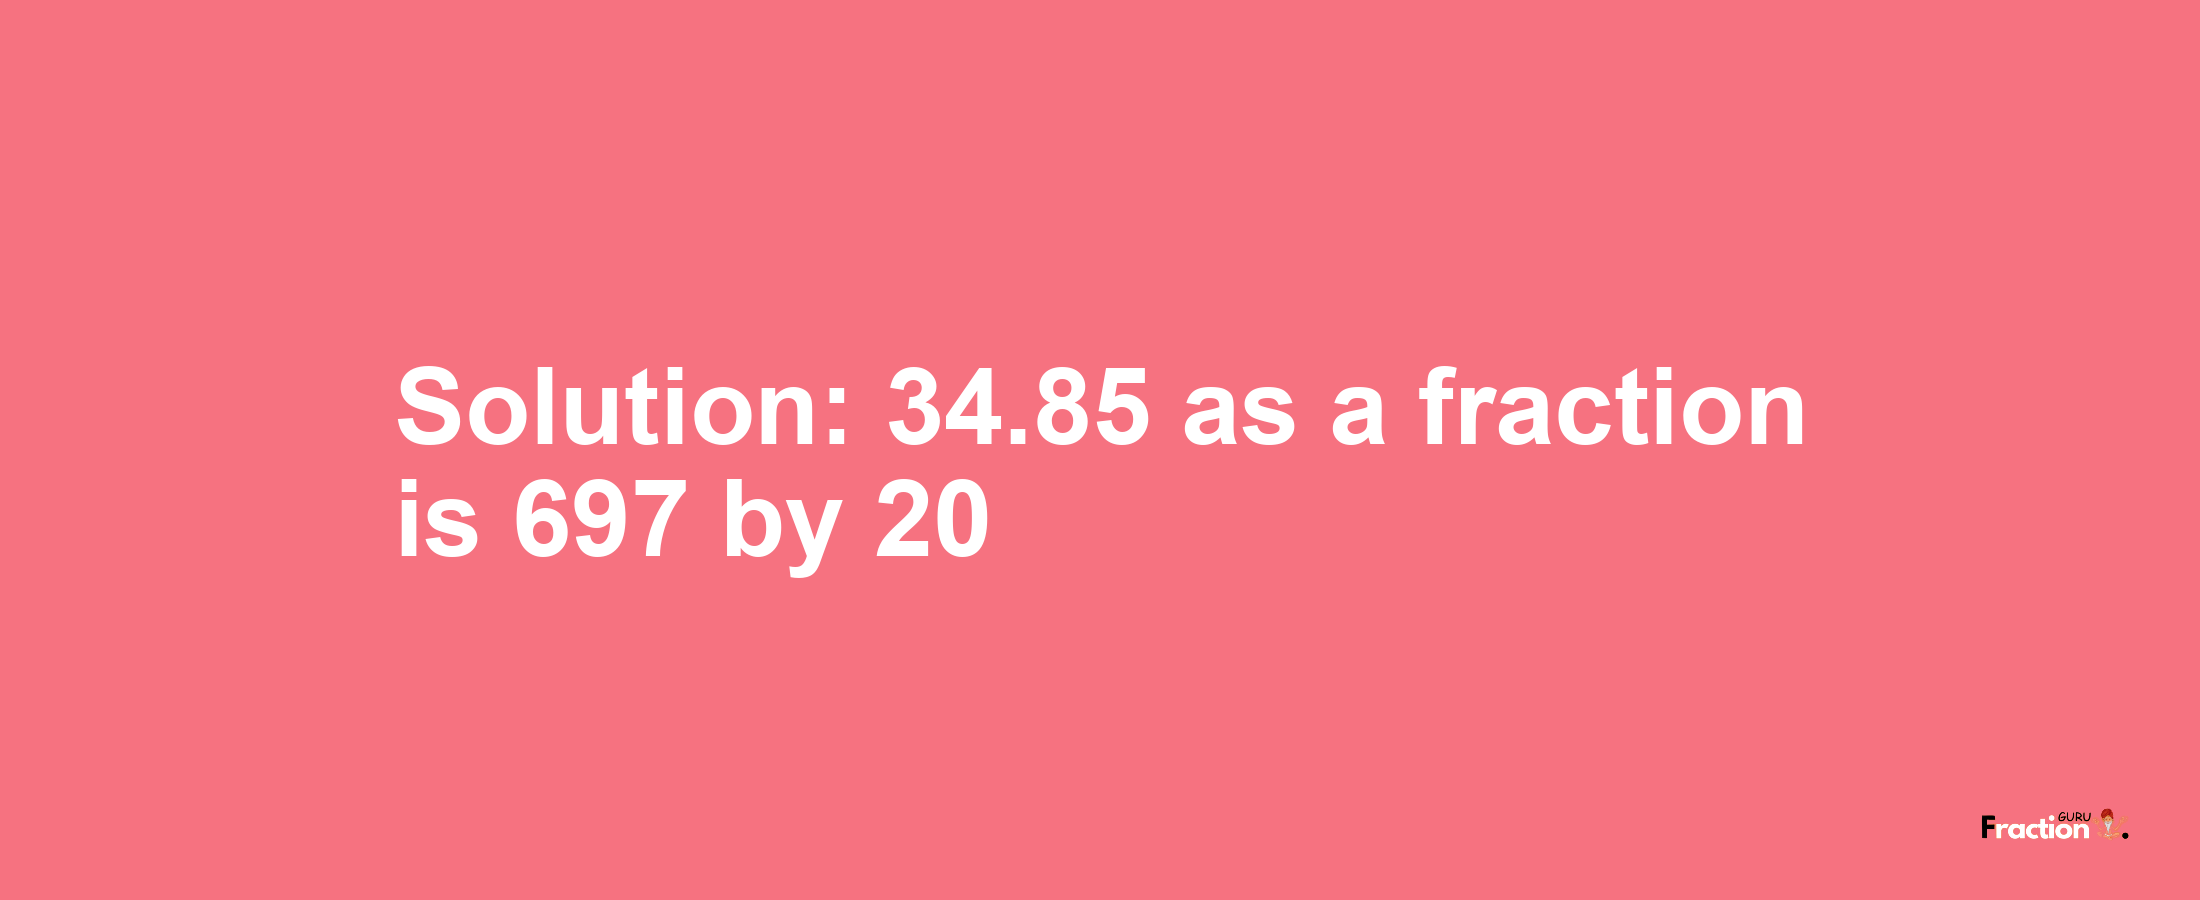 Solution:34.85 as a fraction is 697/20